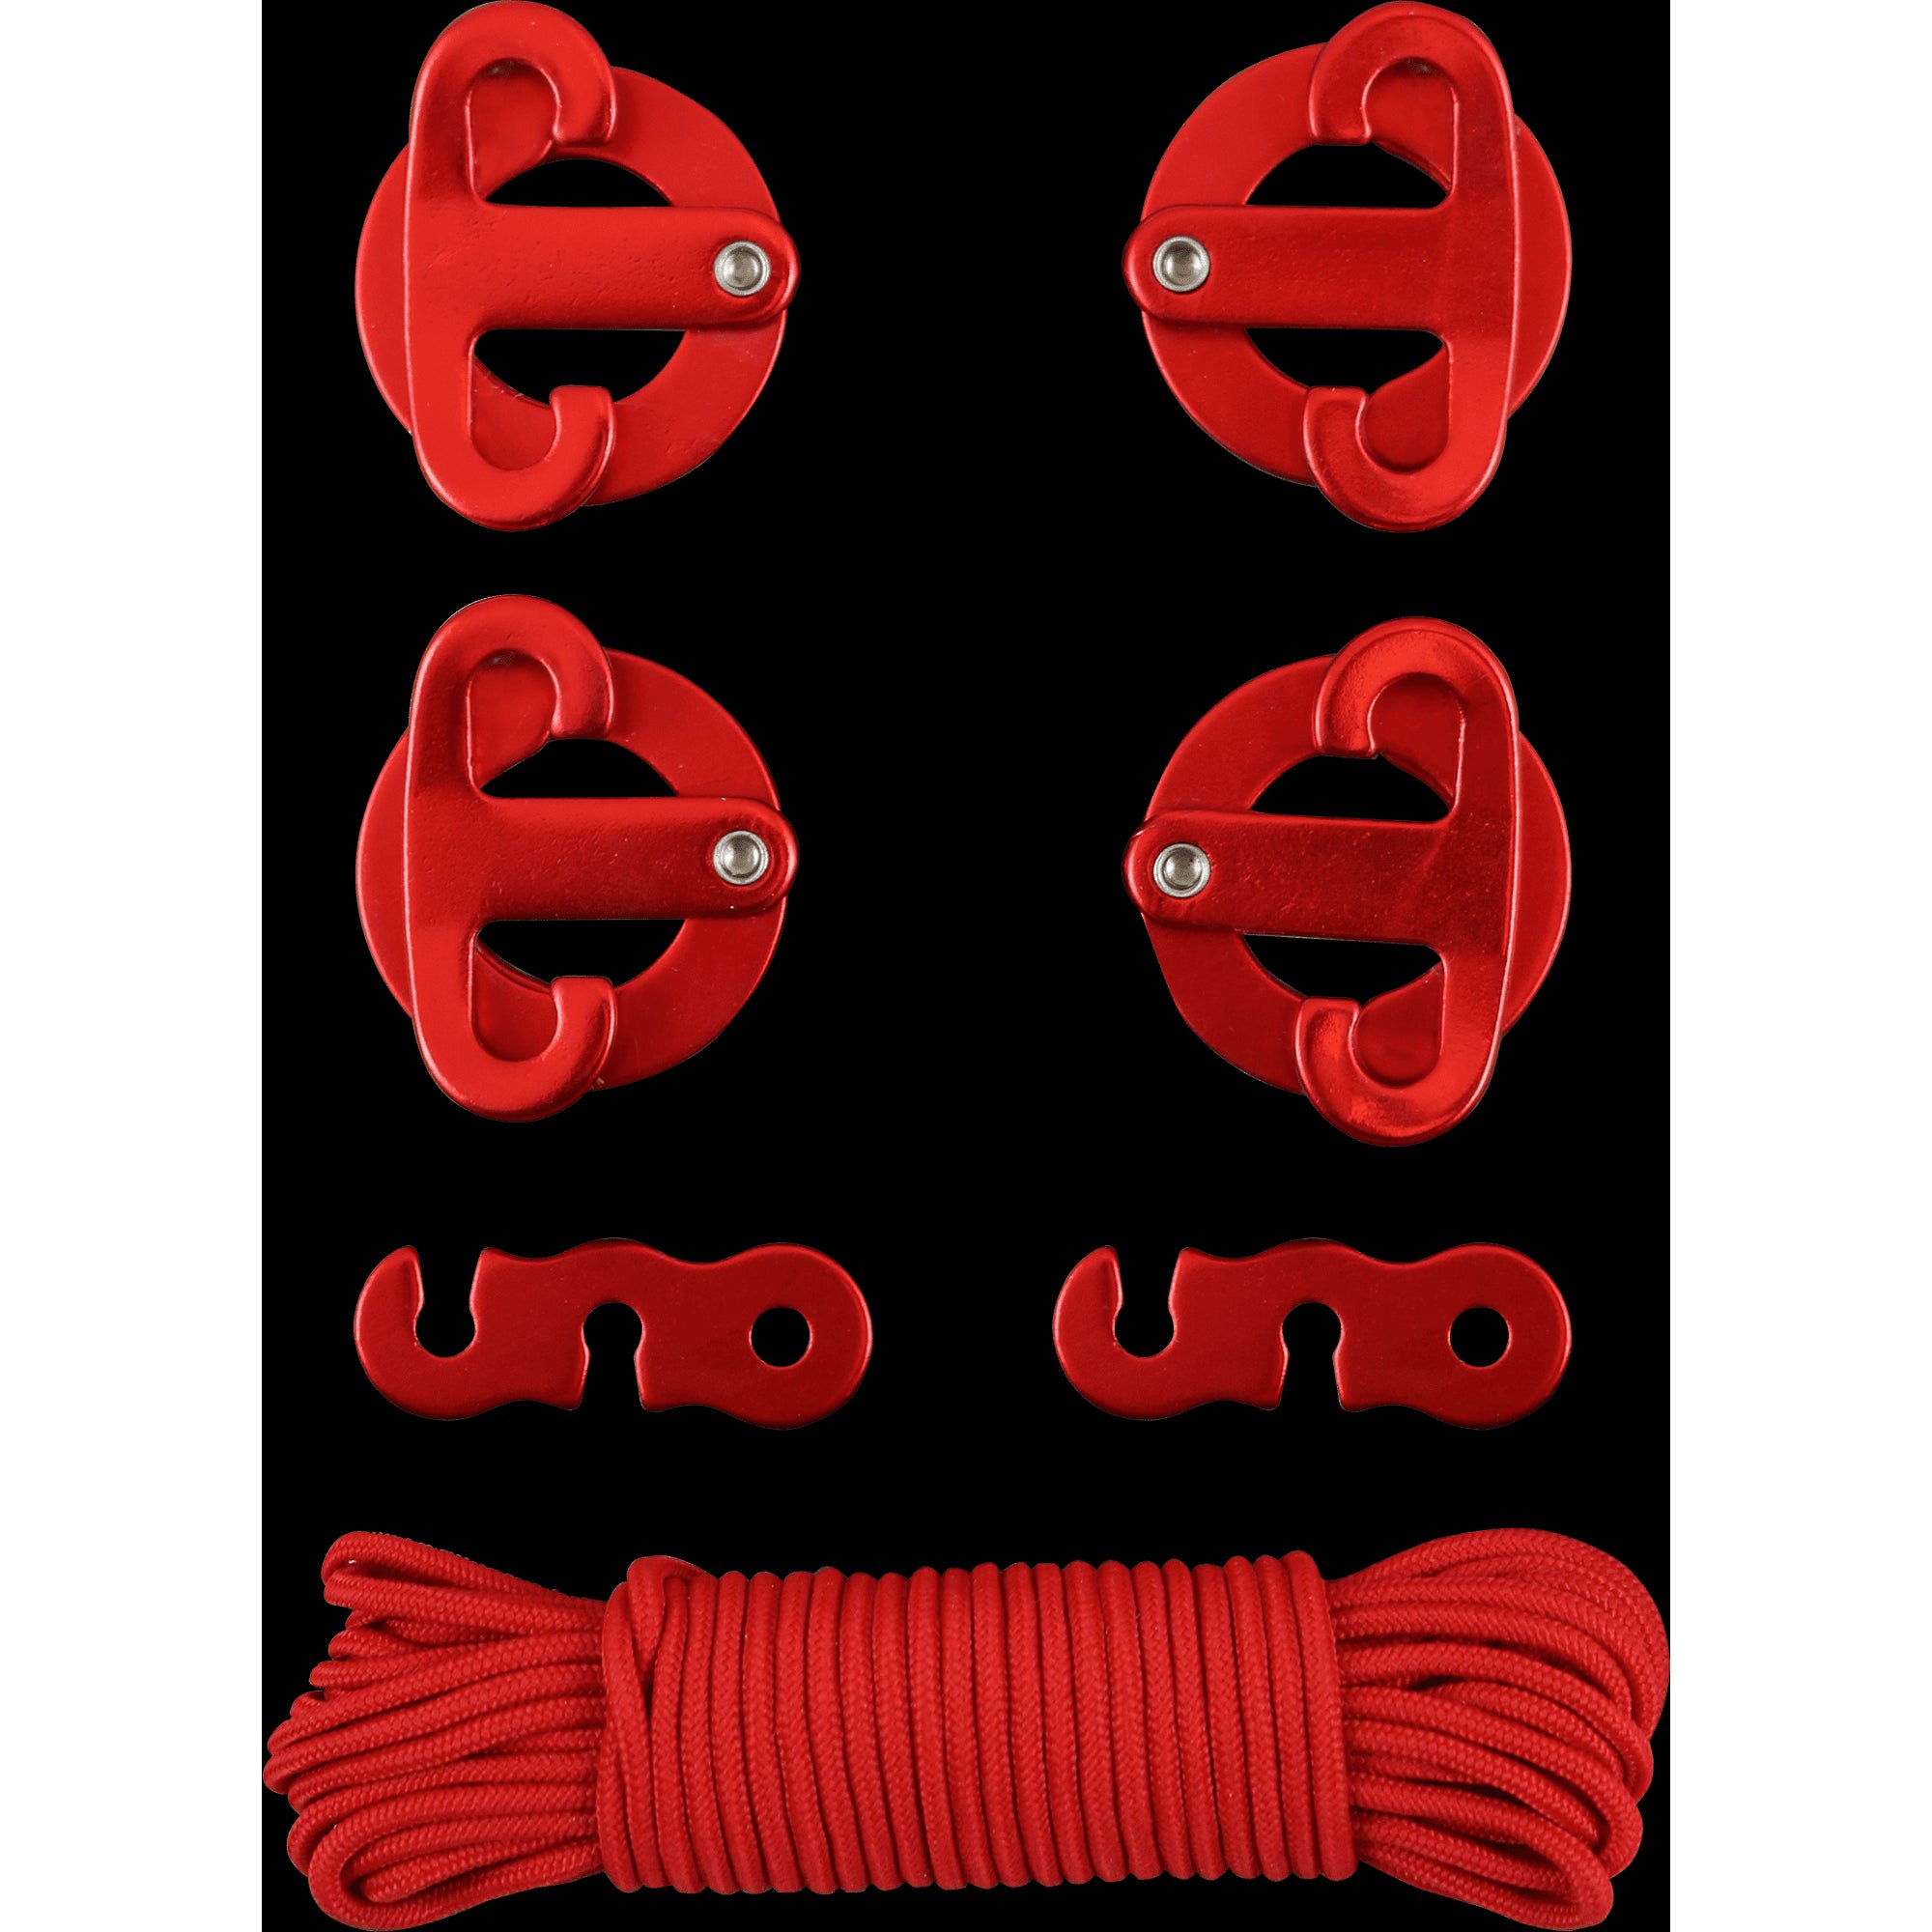 Coghlan's Red Anodized Aluminum Suspended Cord Line Anchor Clip Attachment Set